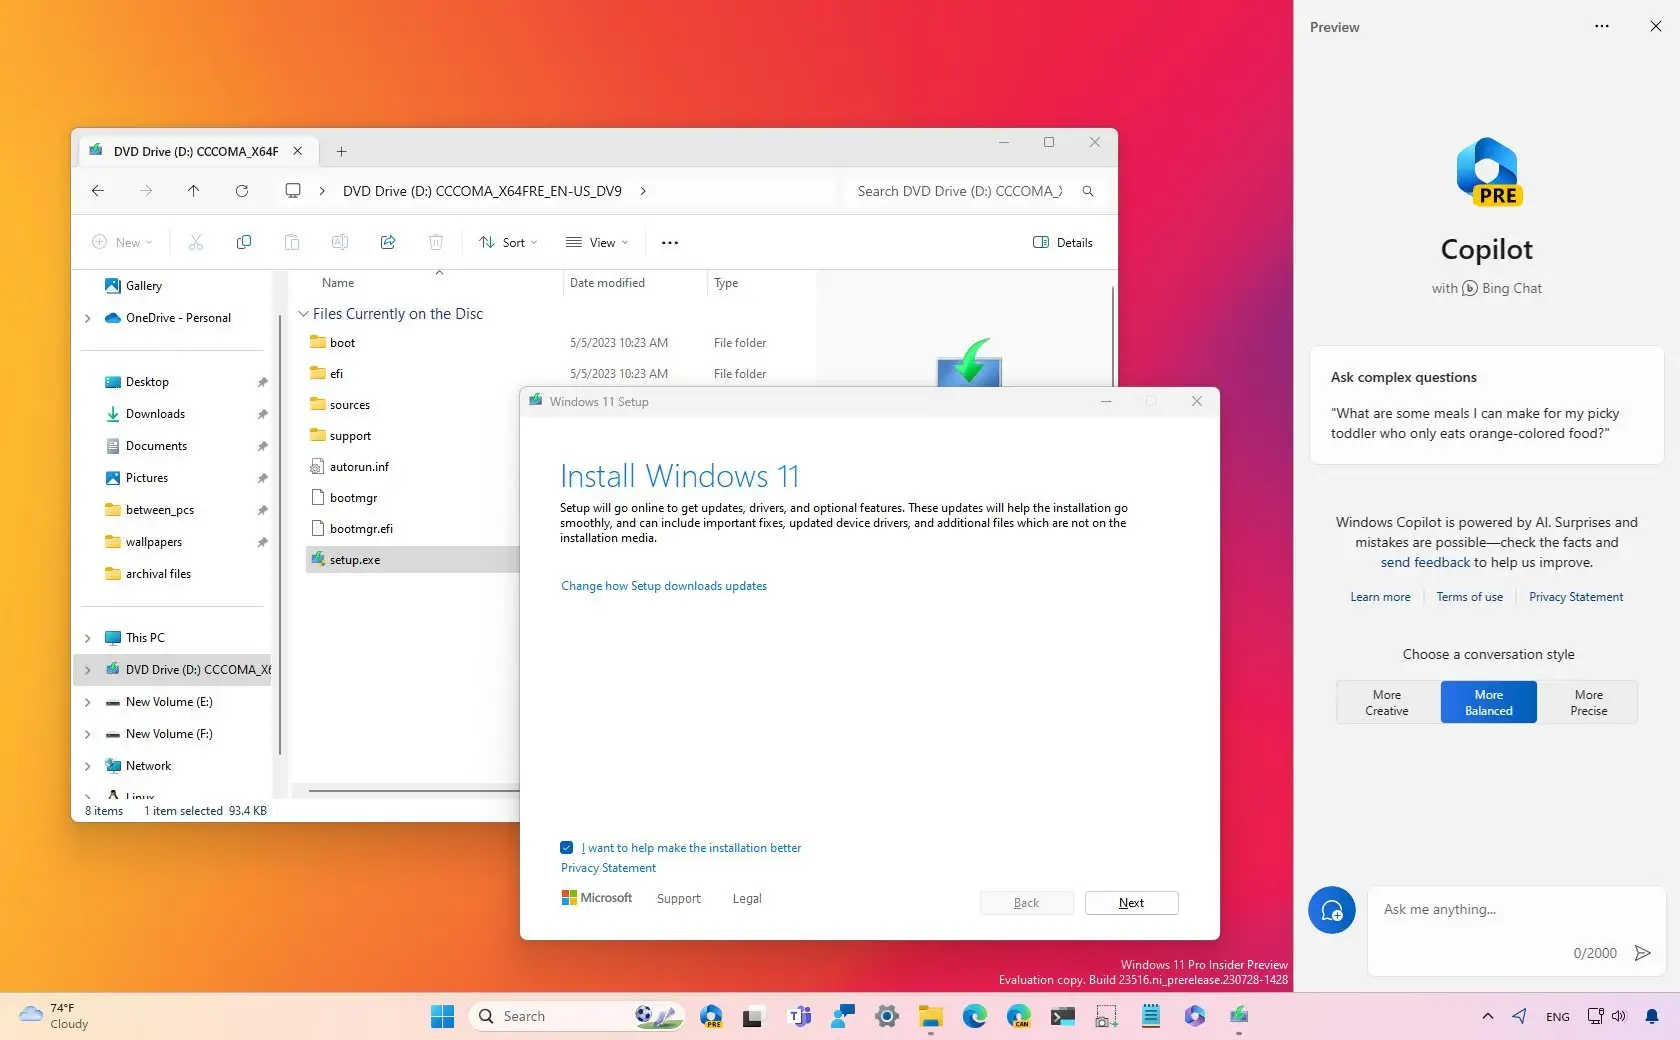 Windows 11 23H2 update: How to download it now